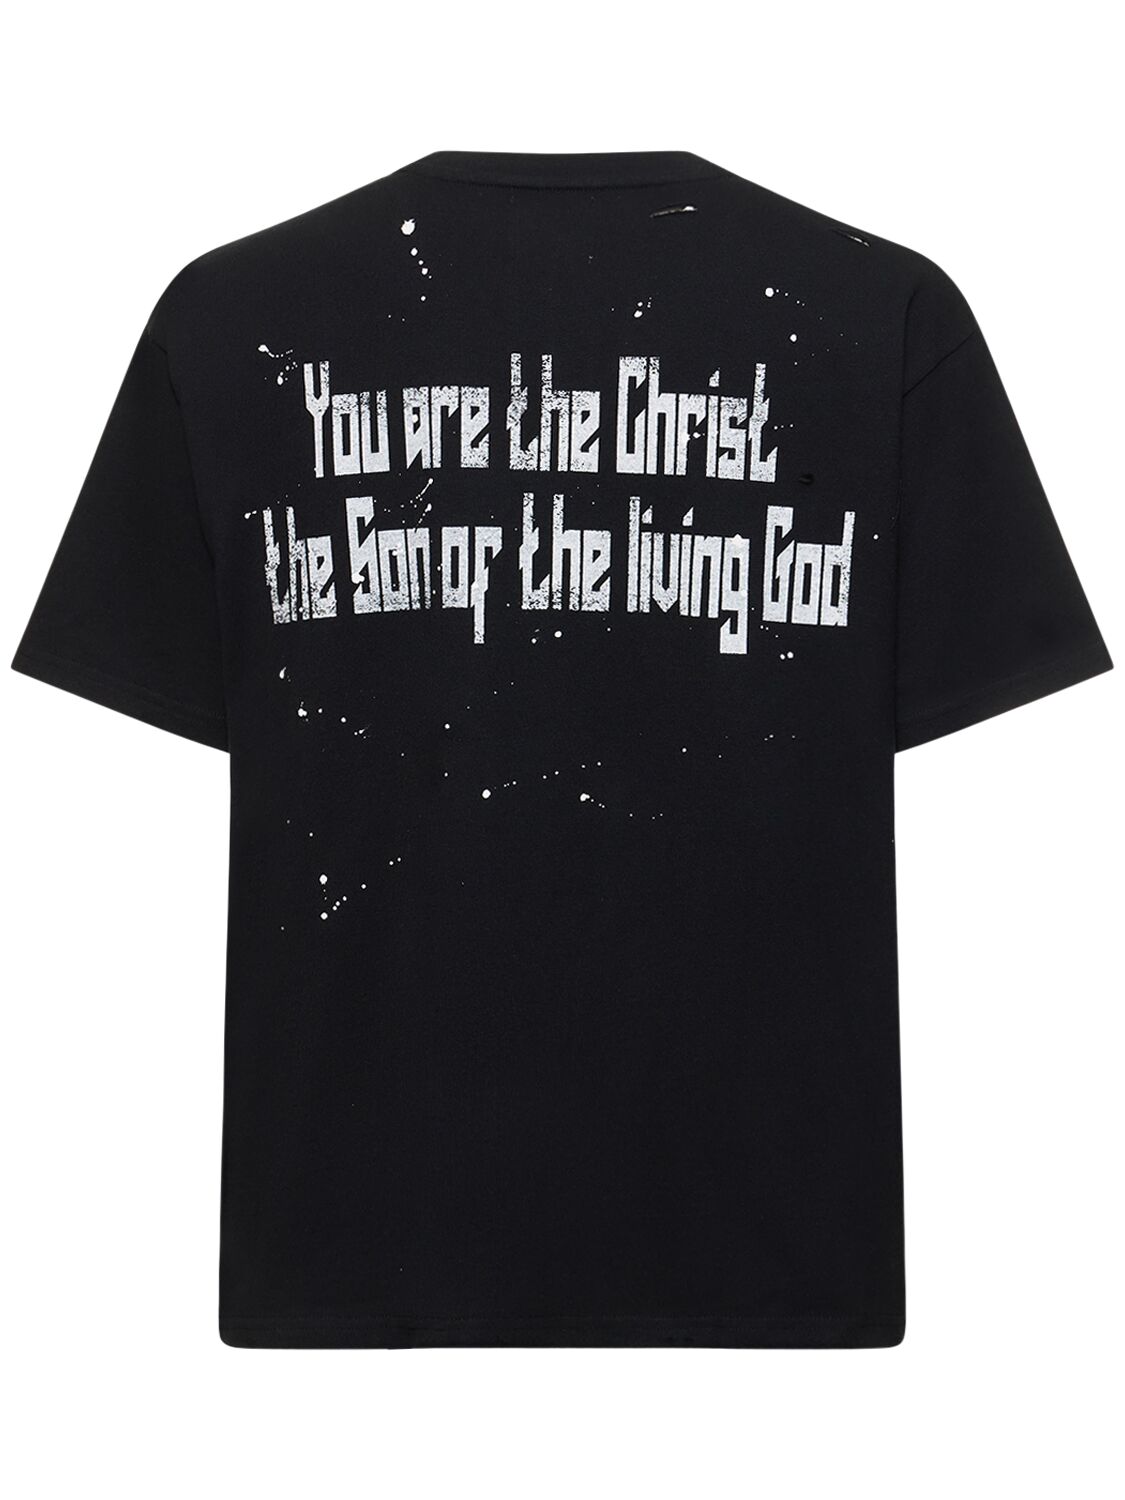 Shop Someit S.o.g. Printed Cotton T-shirt In Black